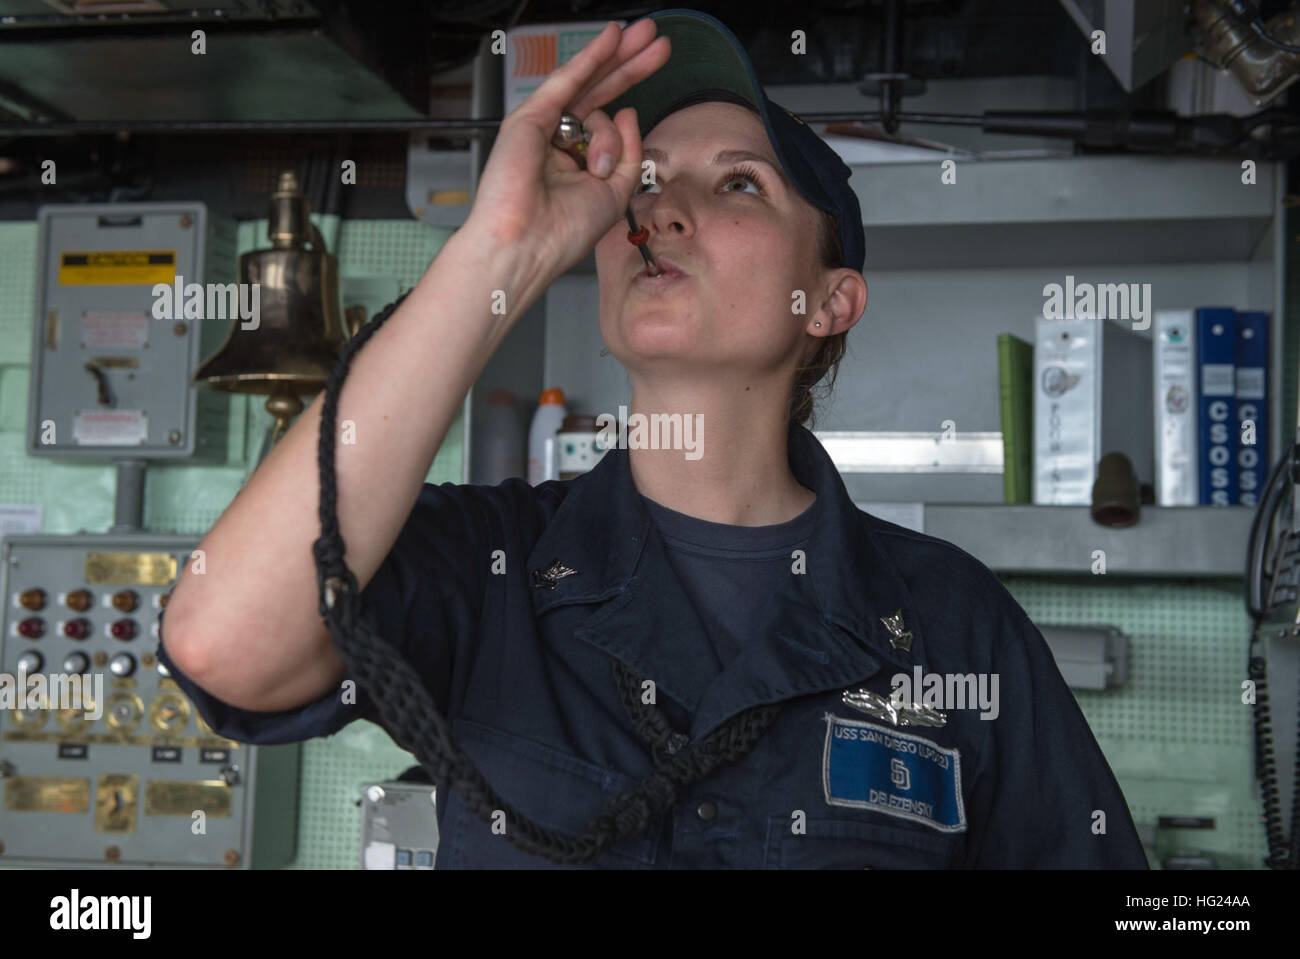 150206-N-IK388-014  PACIFIC OCEAN (Feb. 06, 2015) – Boatswain’s Mate 2nd Class Tara Delezenski, from Wilton, California, pipes an announcement to the crew from the bridge of amphibious transport dock ship USS San Diego (LPD 22). San Diego, part of the Makin Island Amphibious Ready Group, and the embarked 11th Marine Expeditionary Unit are returning to homeport San Diego following a seven-month deployment to the Western Pacific and the U.S. Central Command areas of operation. (U.S. Navy photo by Mass Communication Specialist 2nd Class Stacy M. Atkins Ricks/ Released) USS San Diego bridge operat Stock Photo